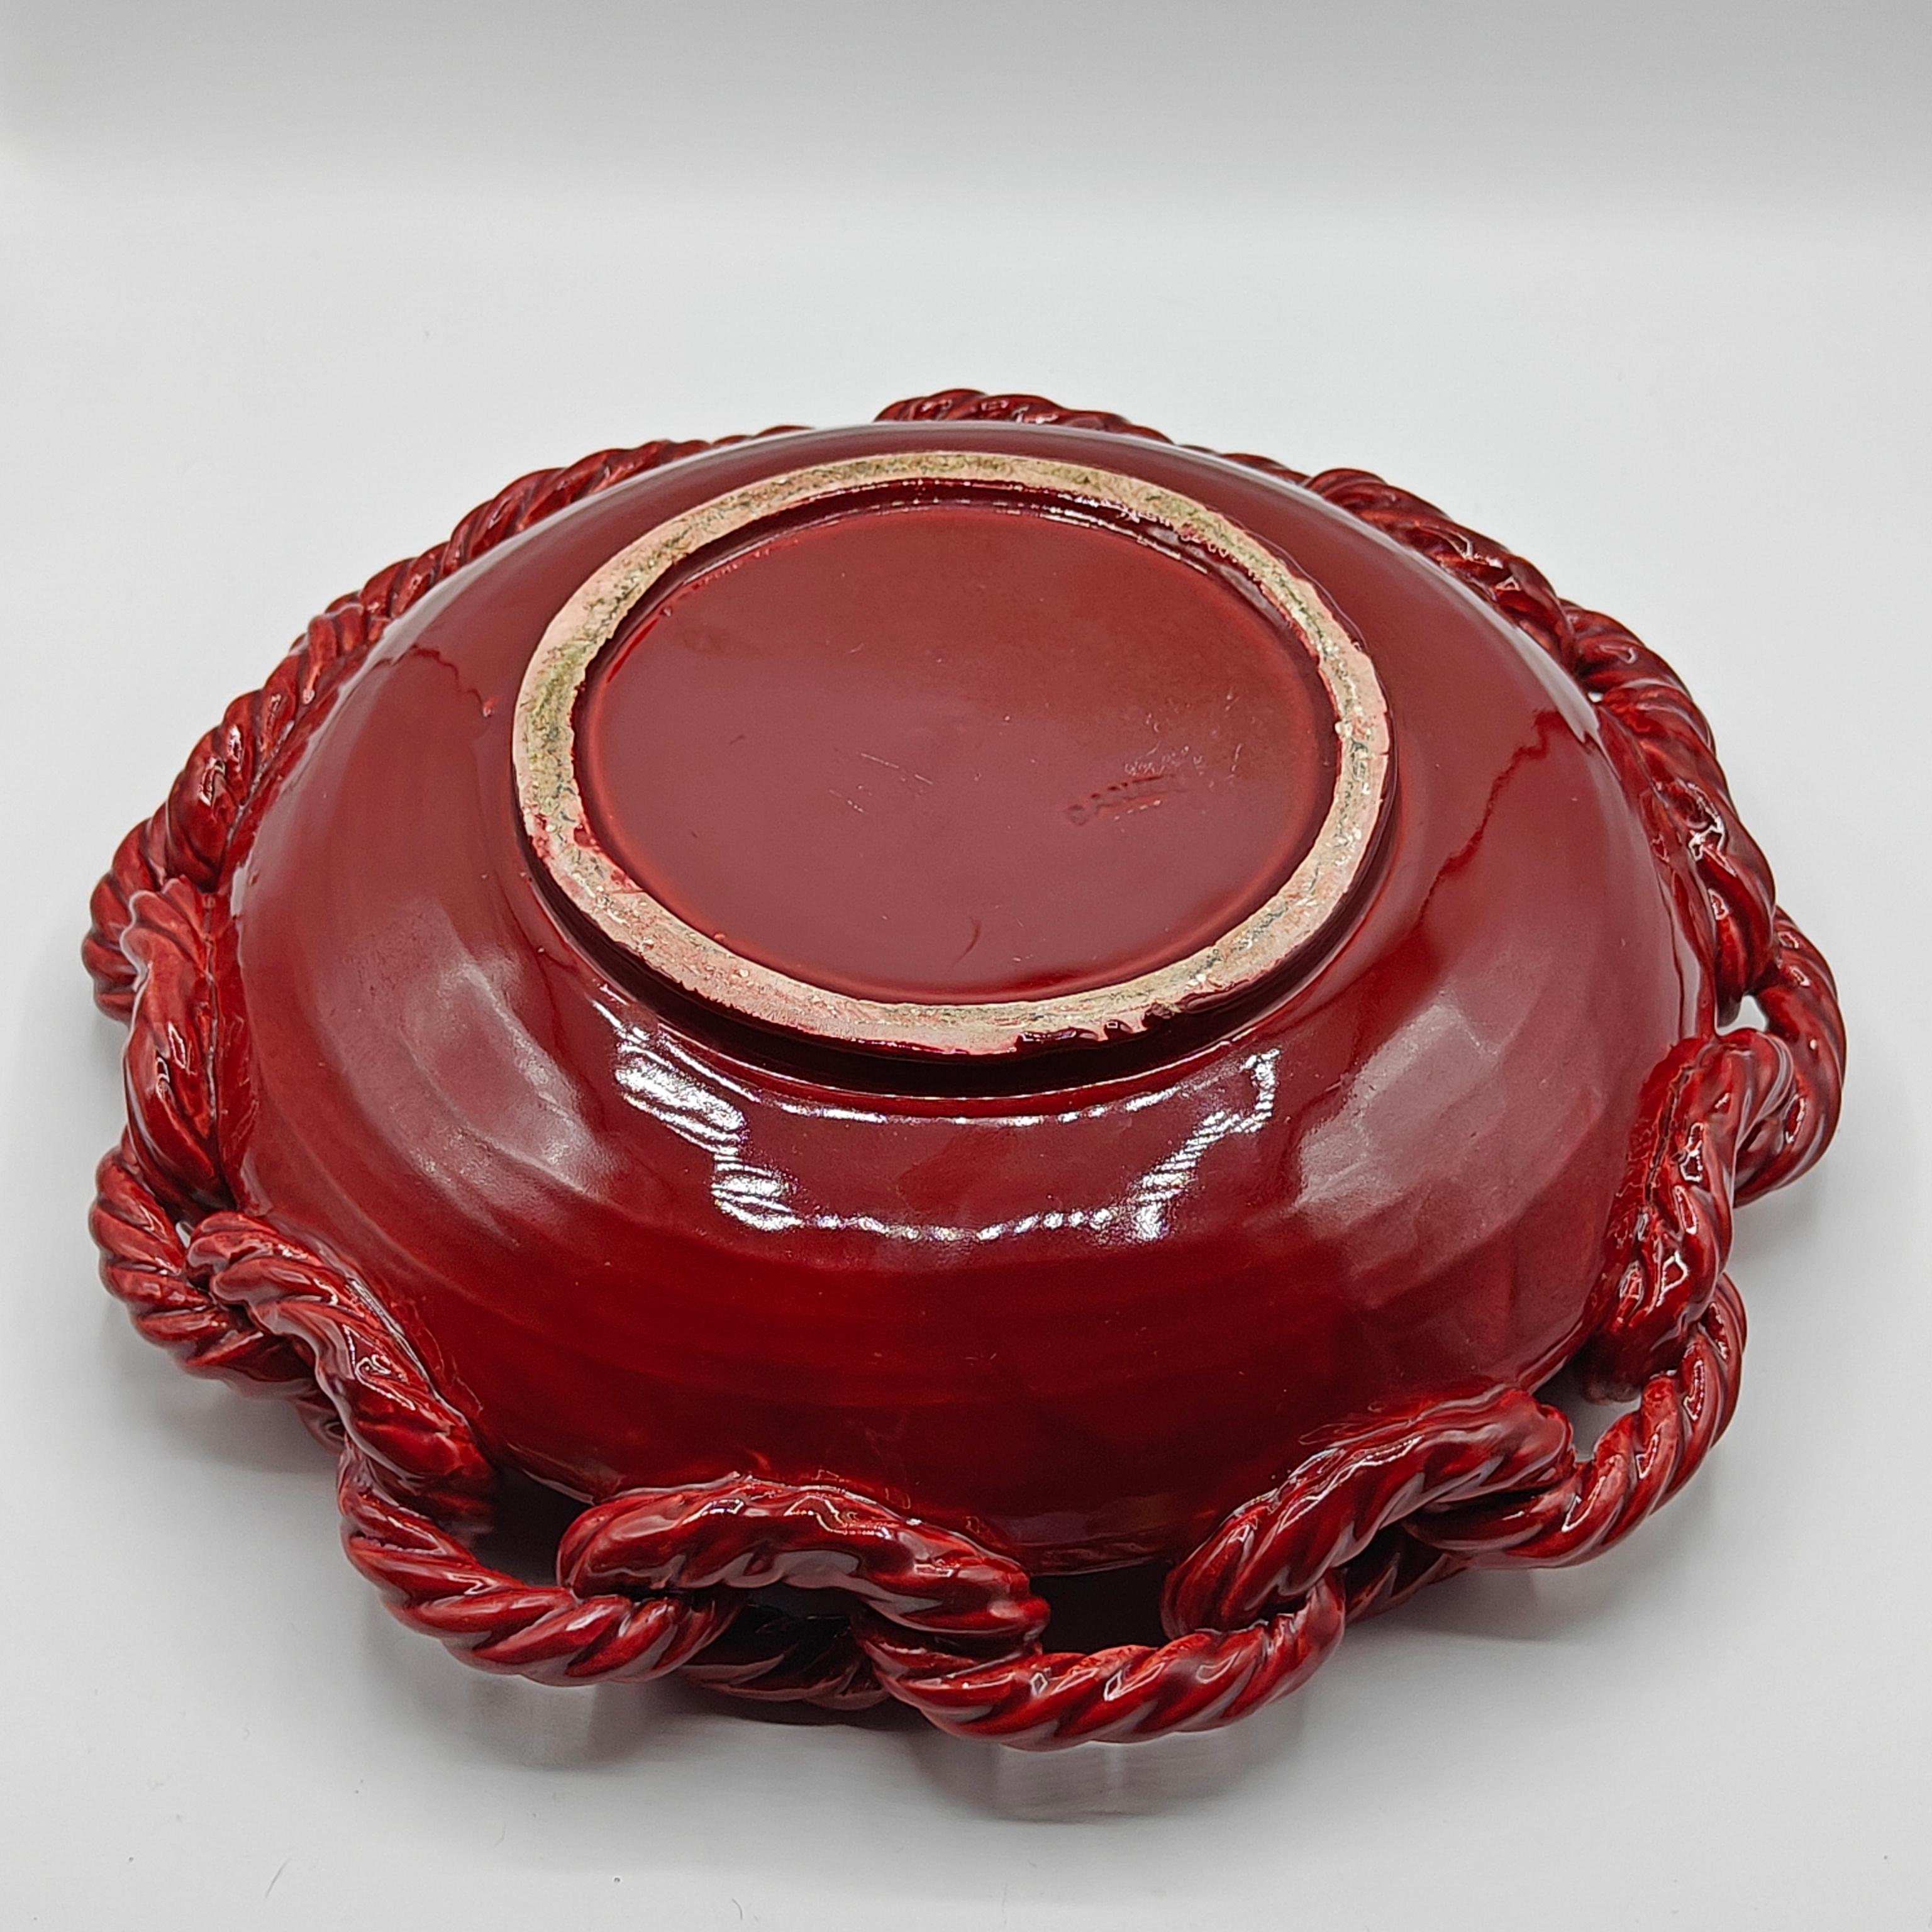 Enameled Red Vallauris bowl with links